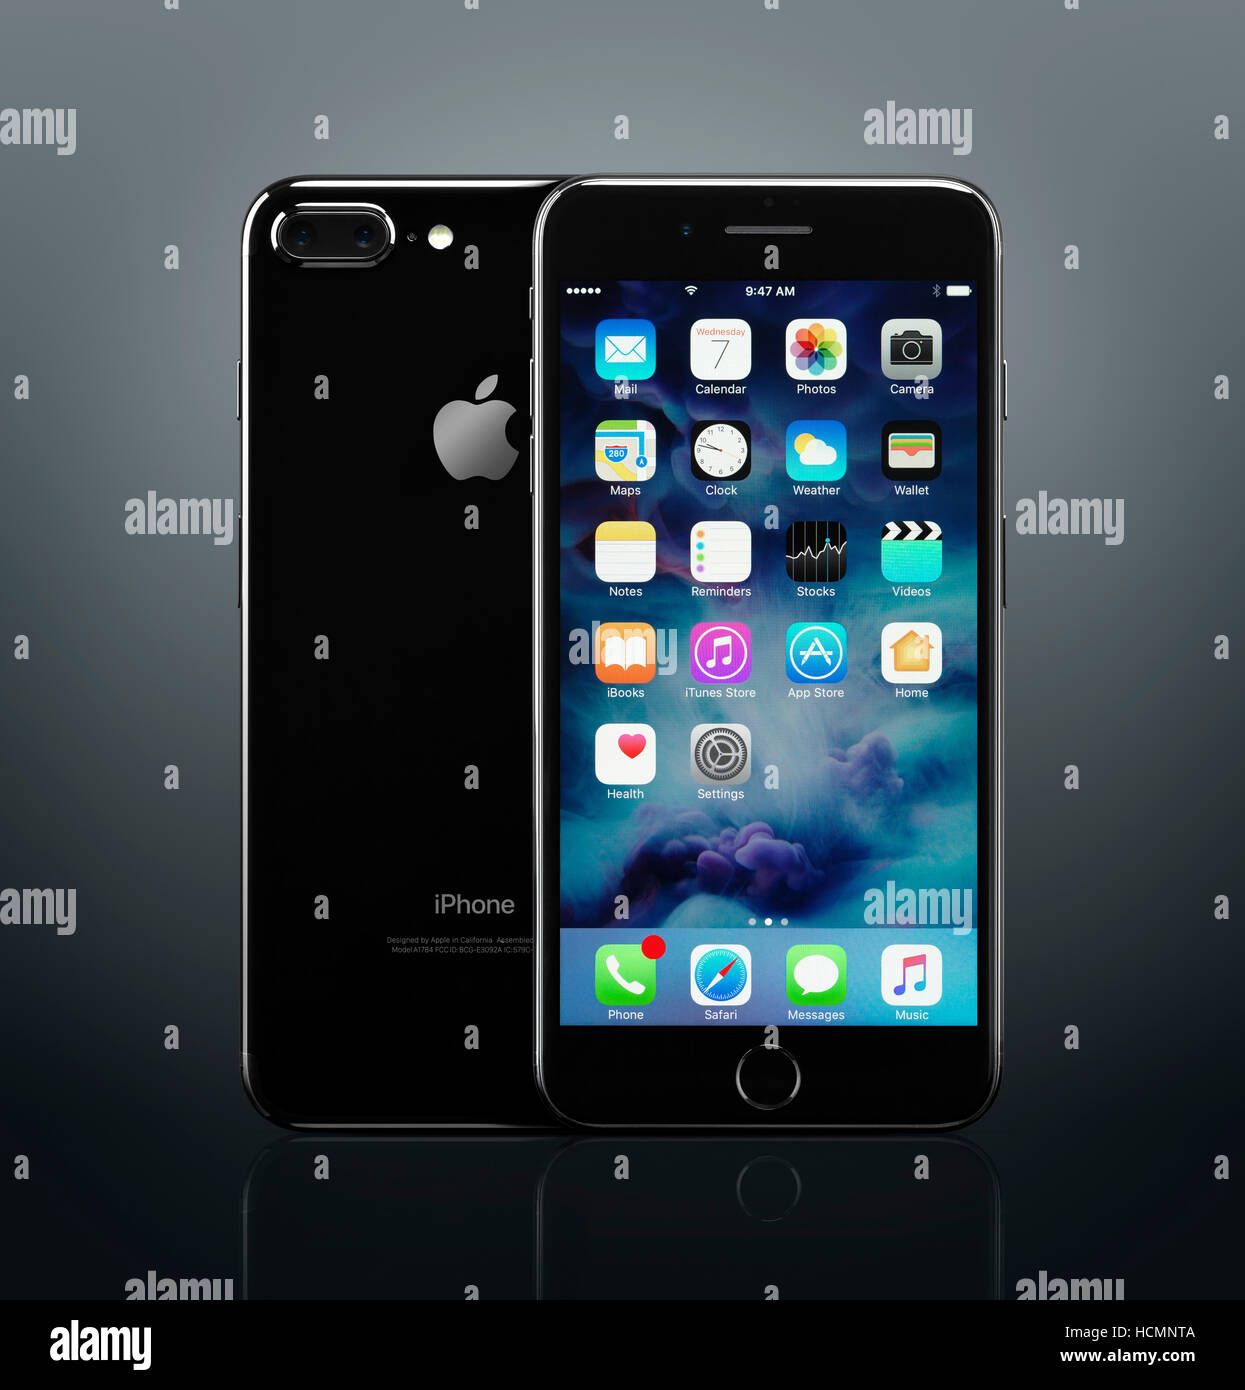 Apple iPhone 7 Plus black front and back with desktop icons on its display  isolated on dark gray background Stock Photo - Alamy